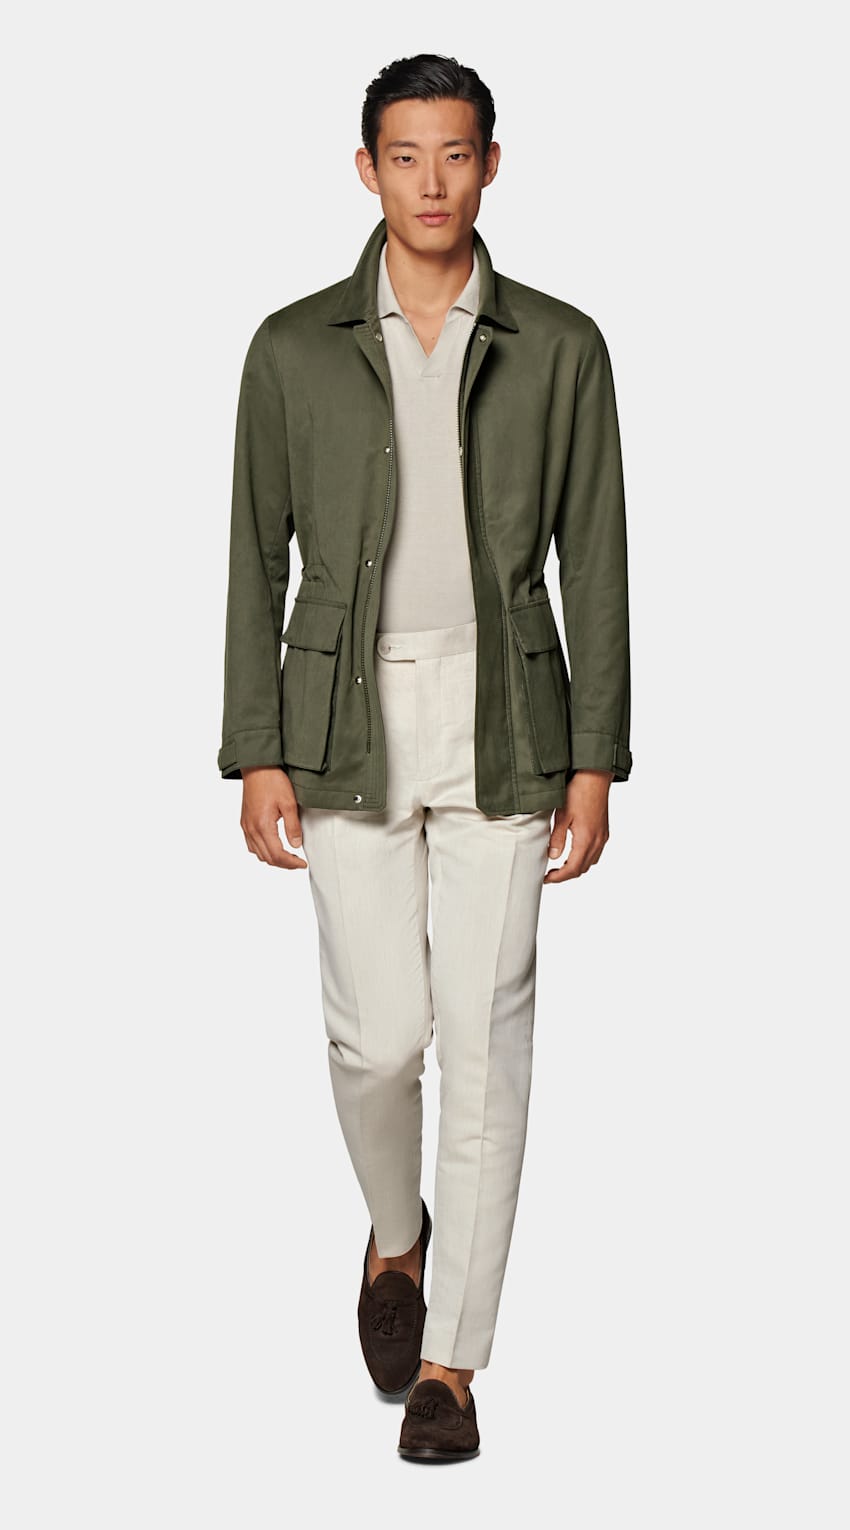 SUITSUPPLY Water-Repellent Technical Fabric by Olmetex, Italy Dark Green Field Jacket